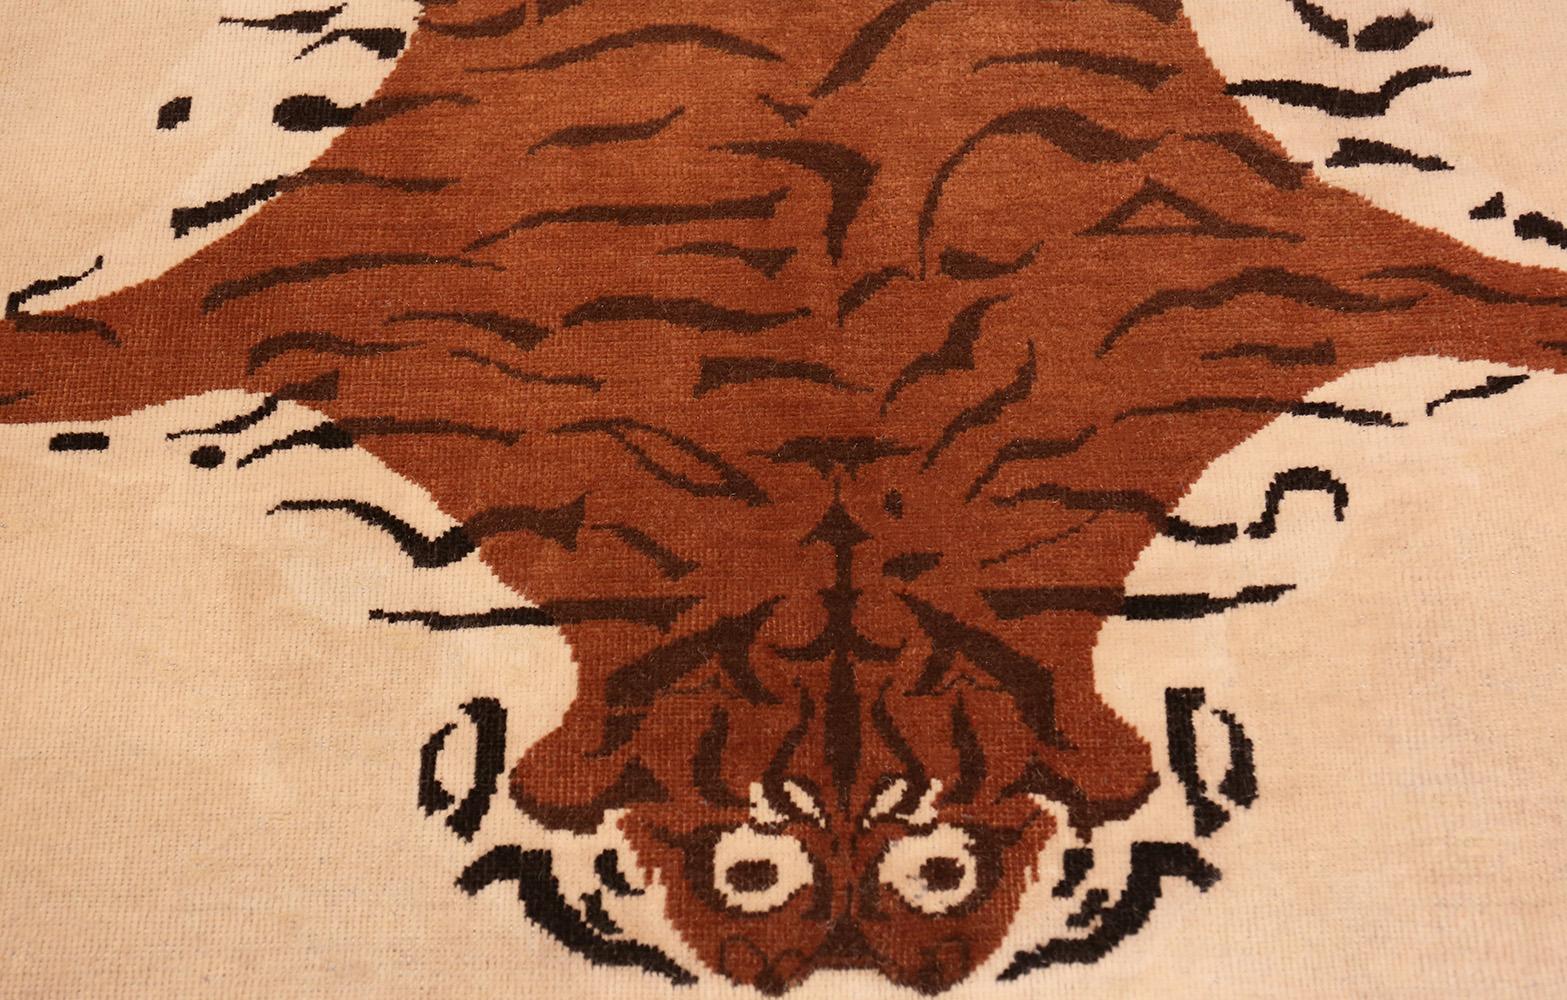 Hand-Knotted Vintage Indian Tiger Design Rug. Size: 5 ft 4 in x 8 ft (1.63 m x 2.44 m)